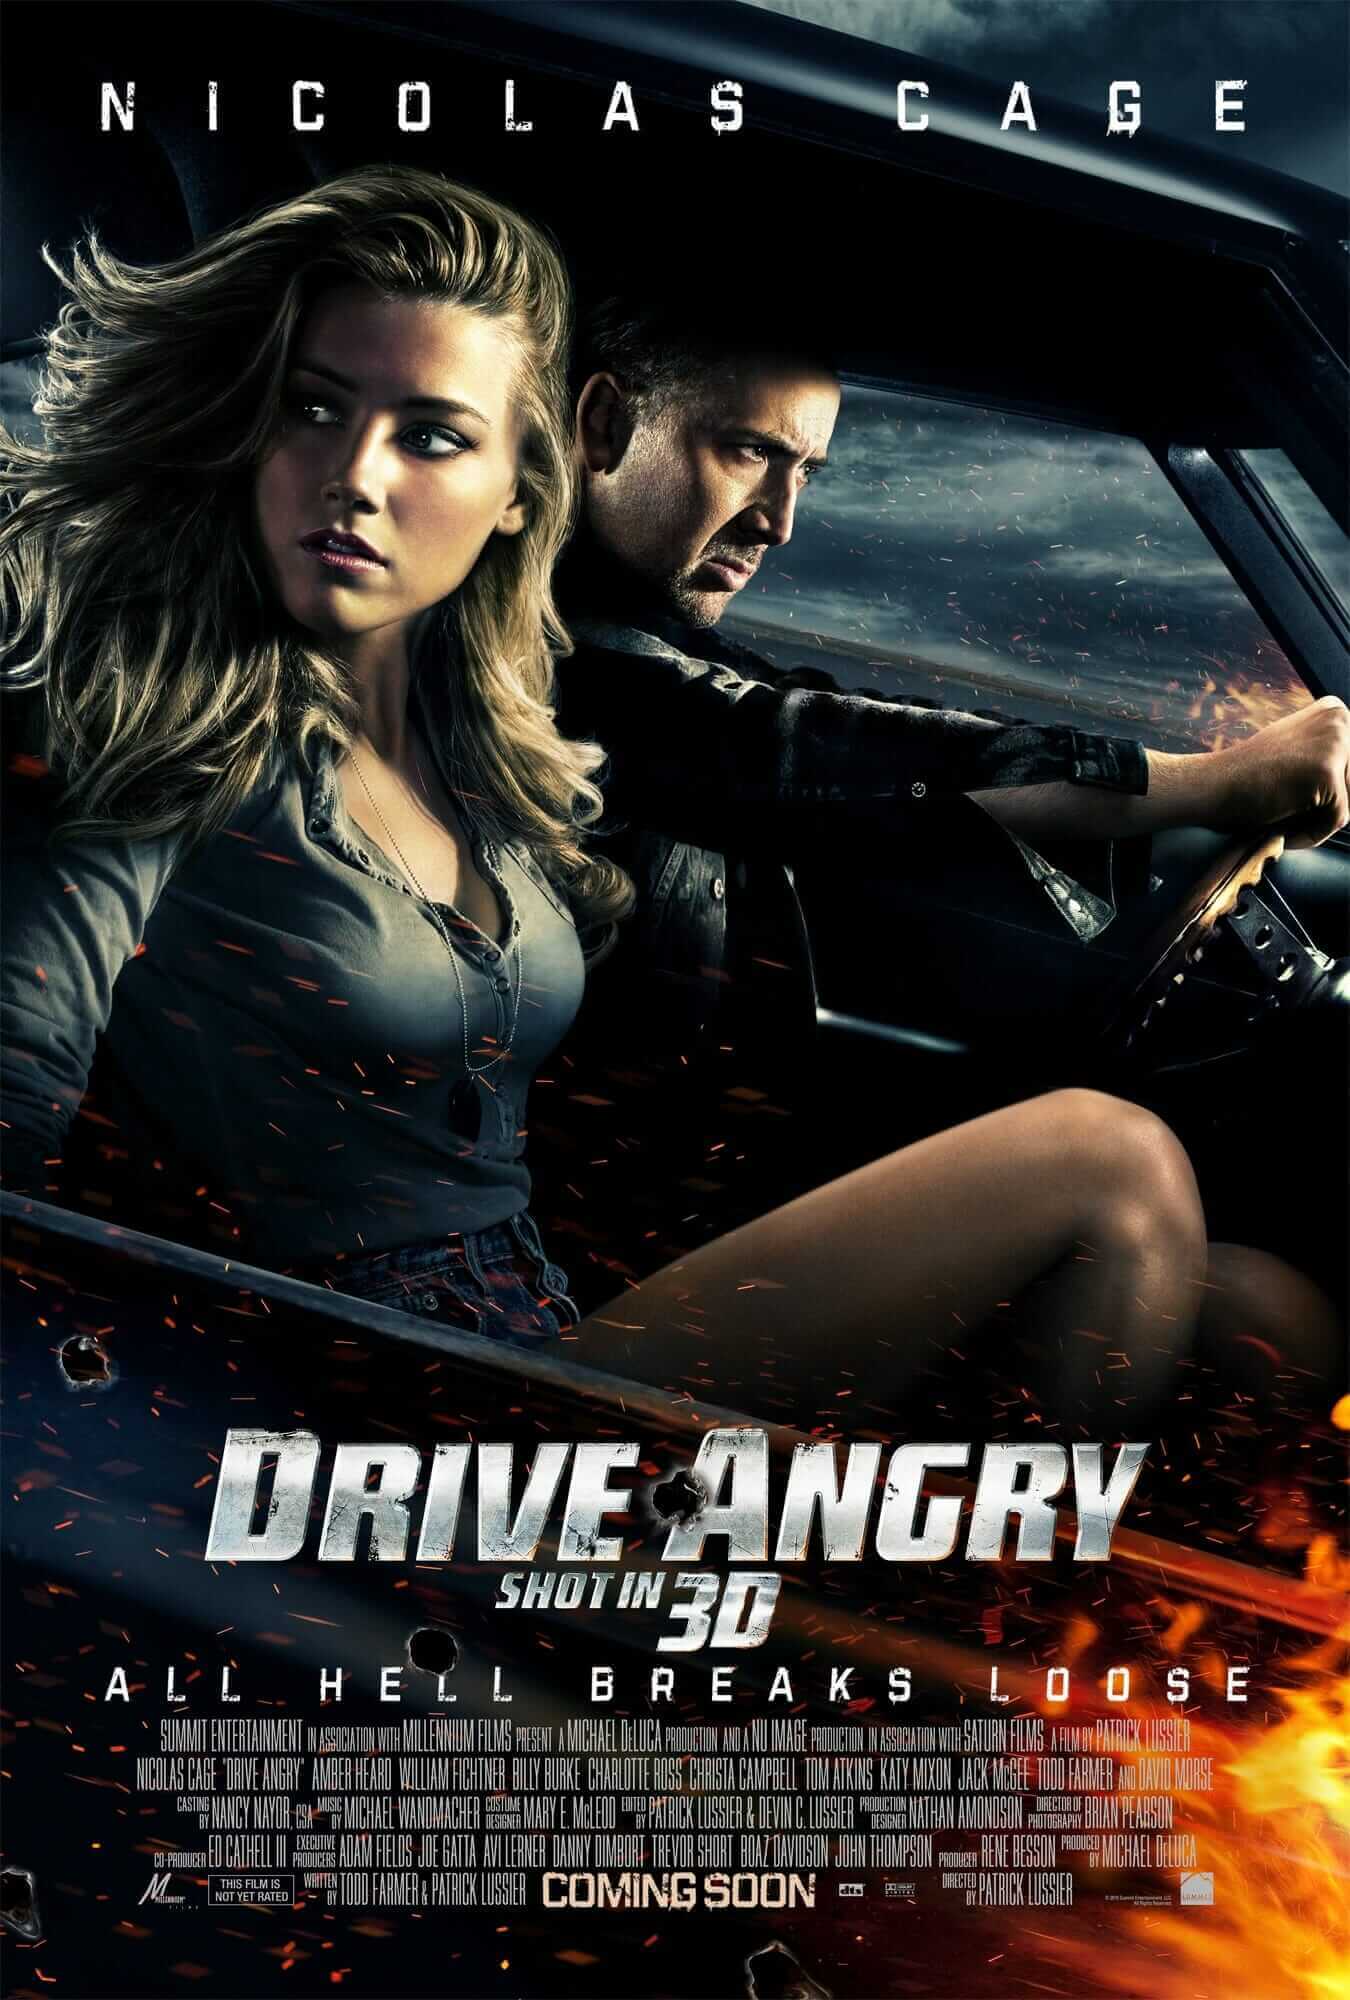 Drive Angry 2011 Nicolas Cage Poster Awfully Good